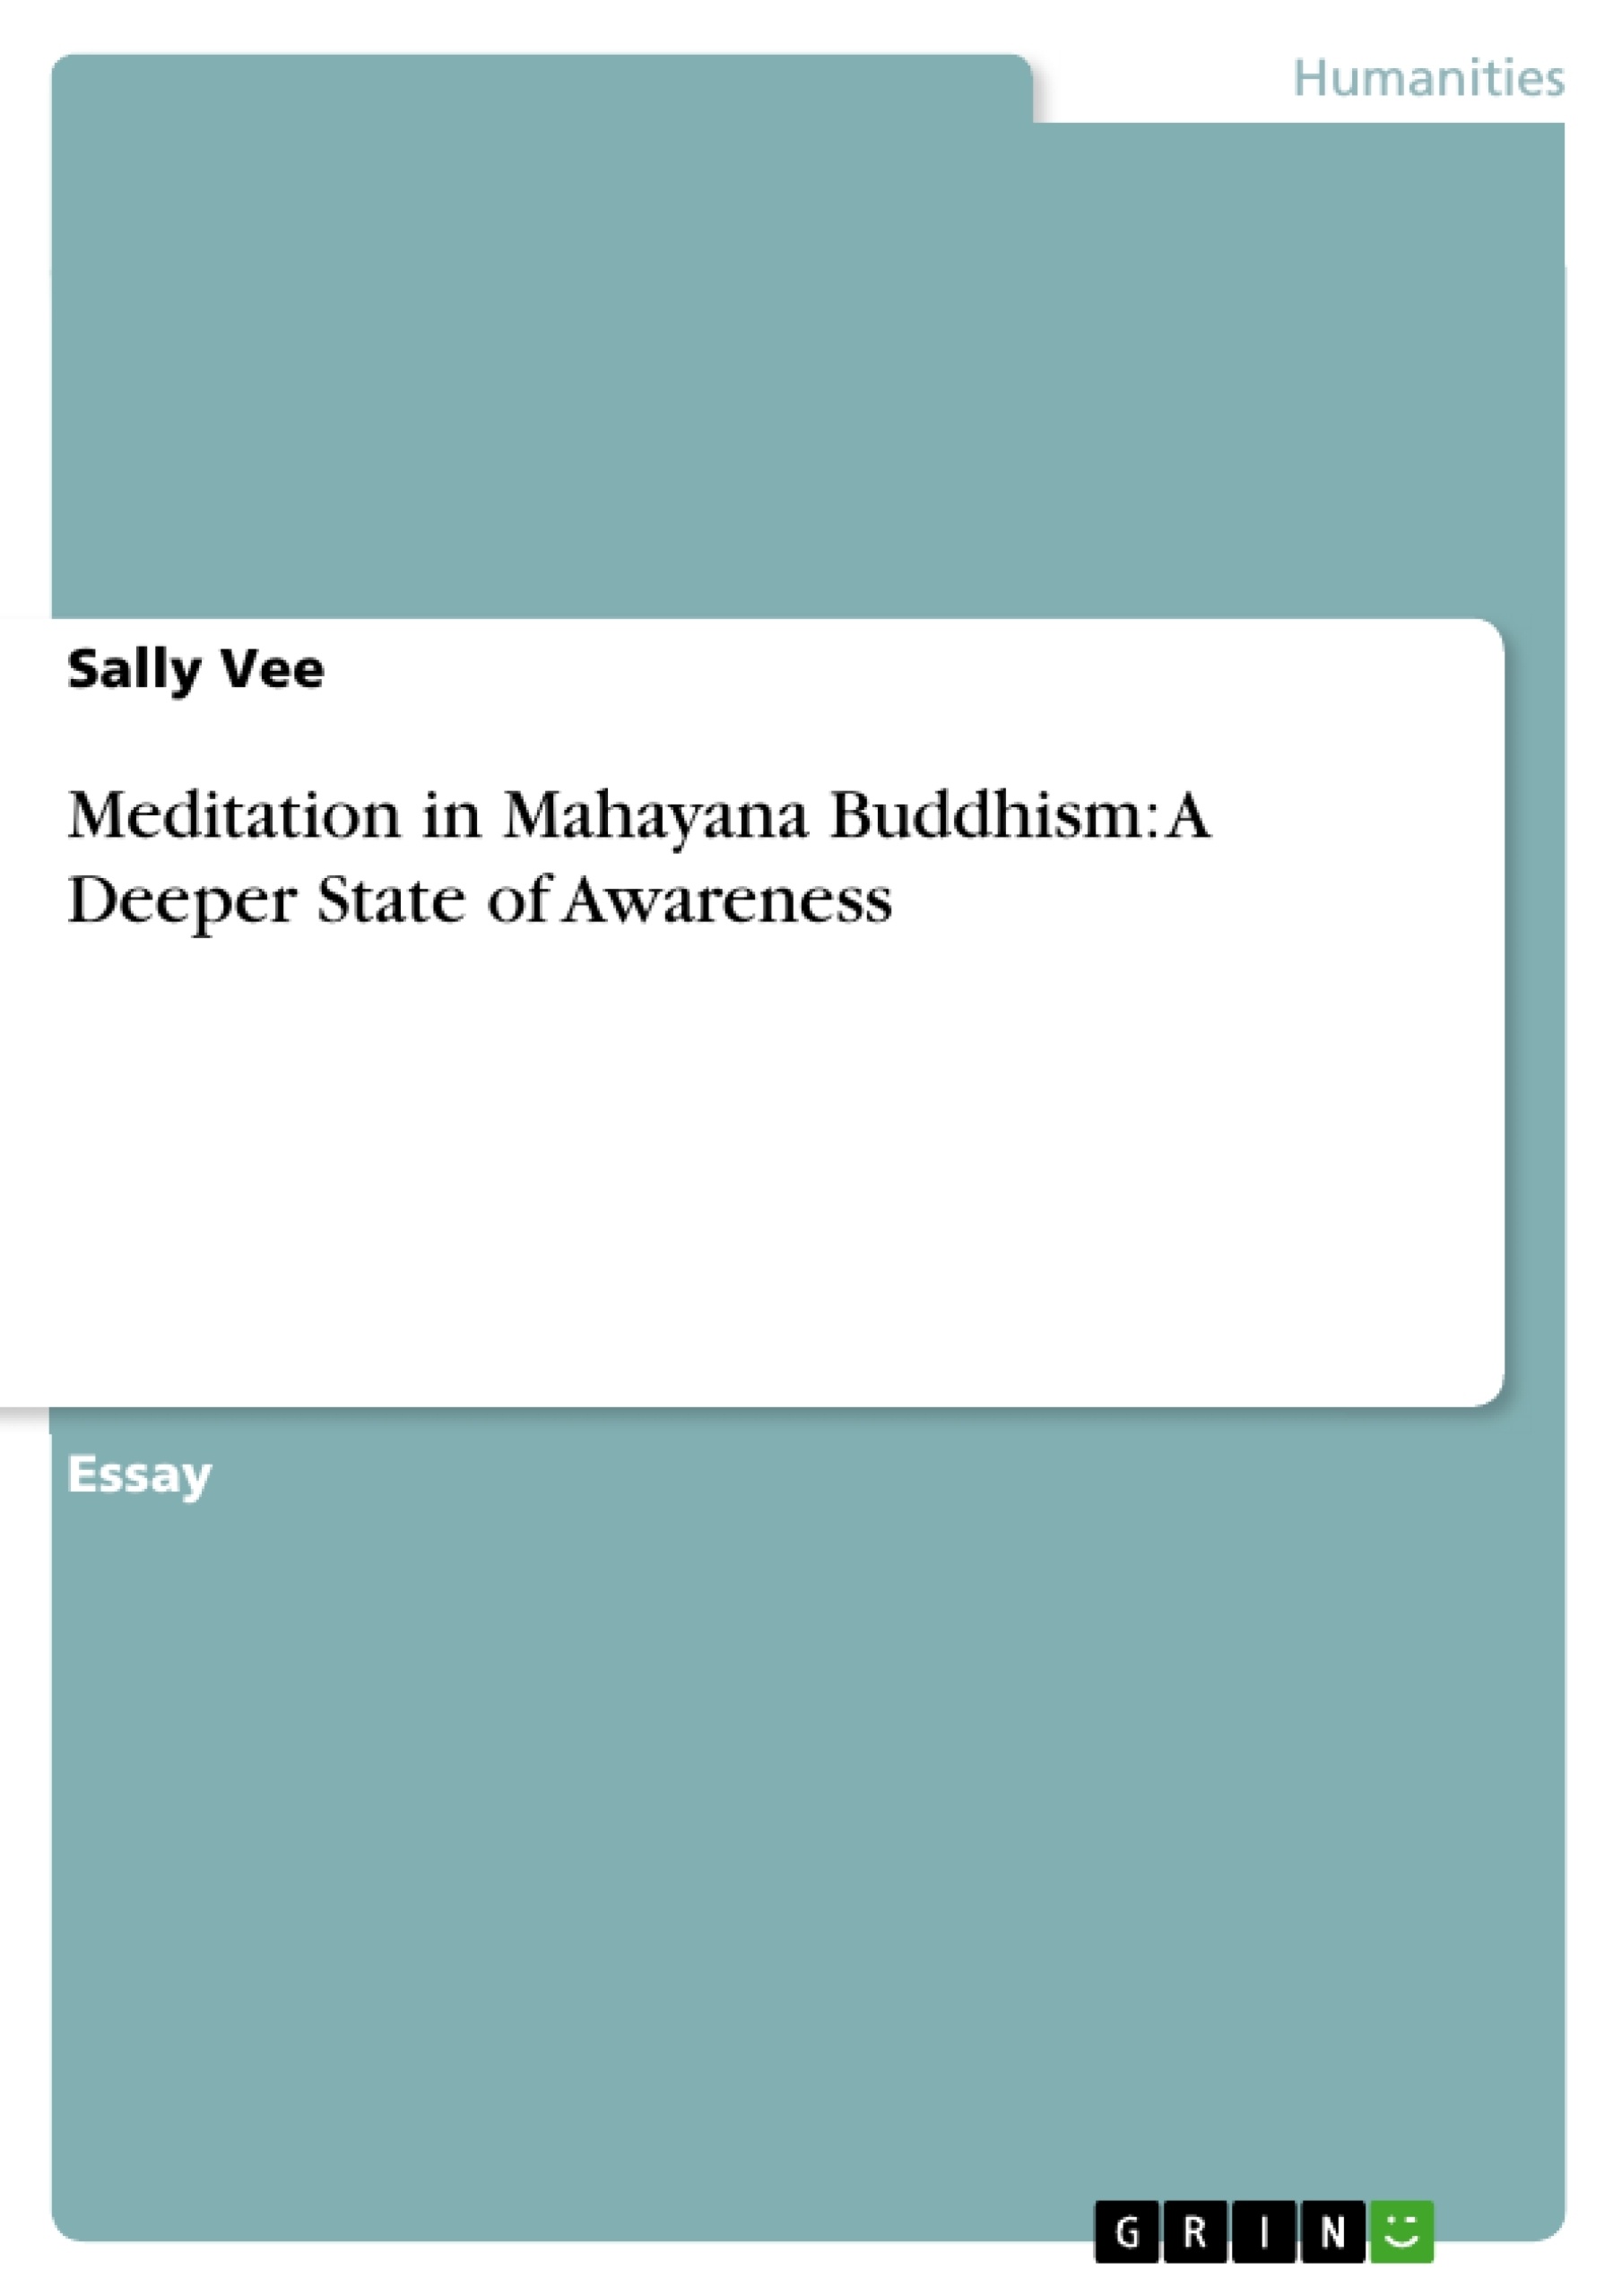 Title: Meditation in Mahayana Buddhism: A Deeper State of Awareness